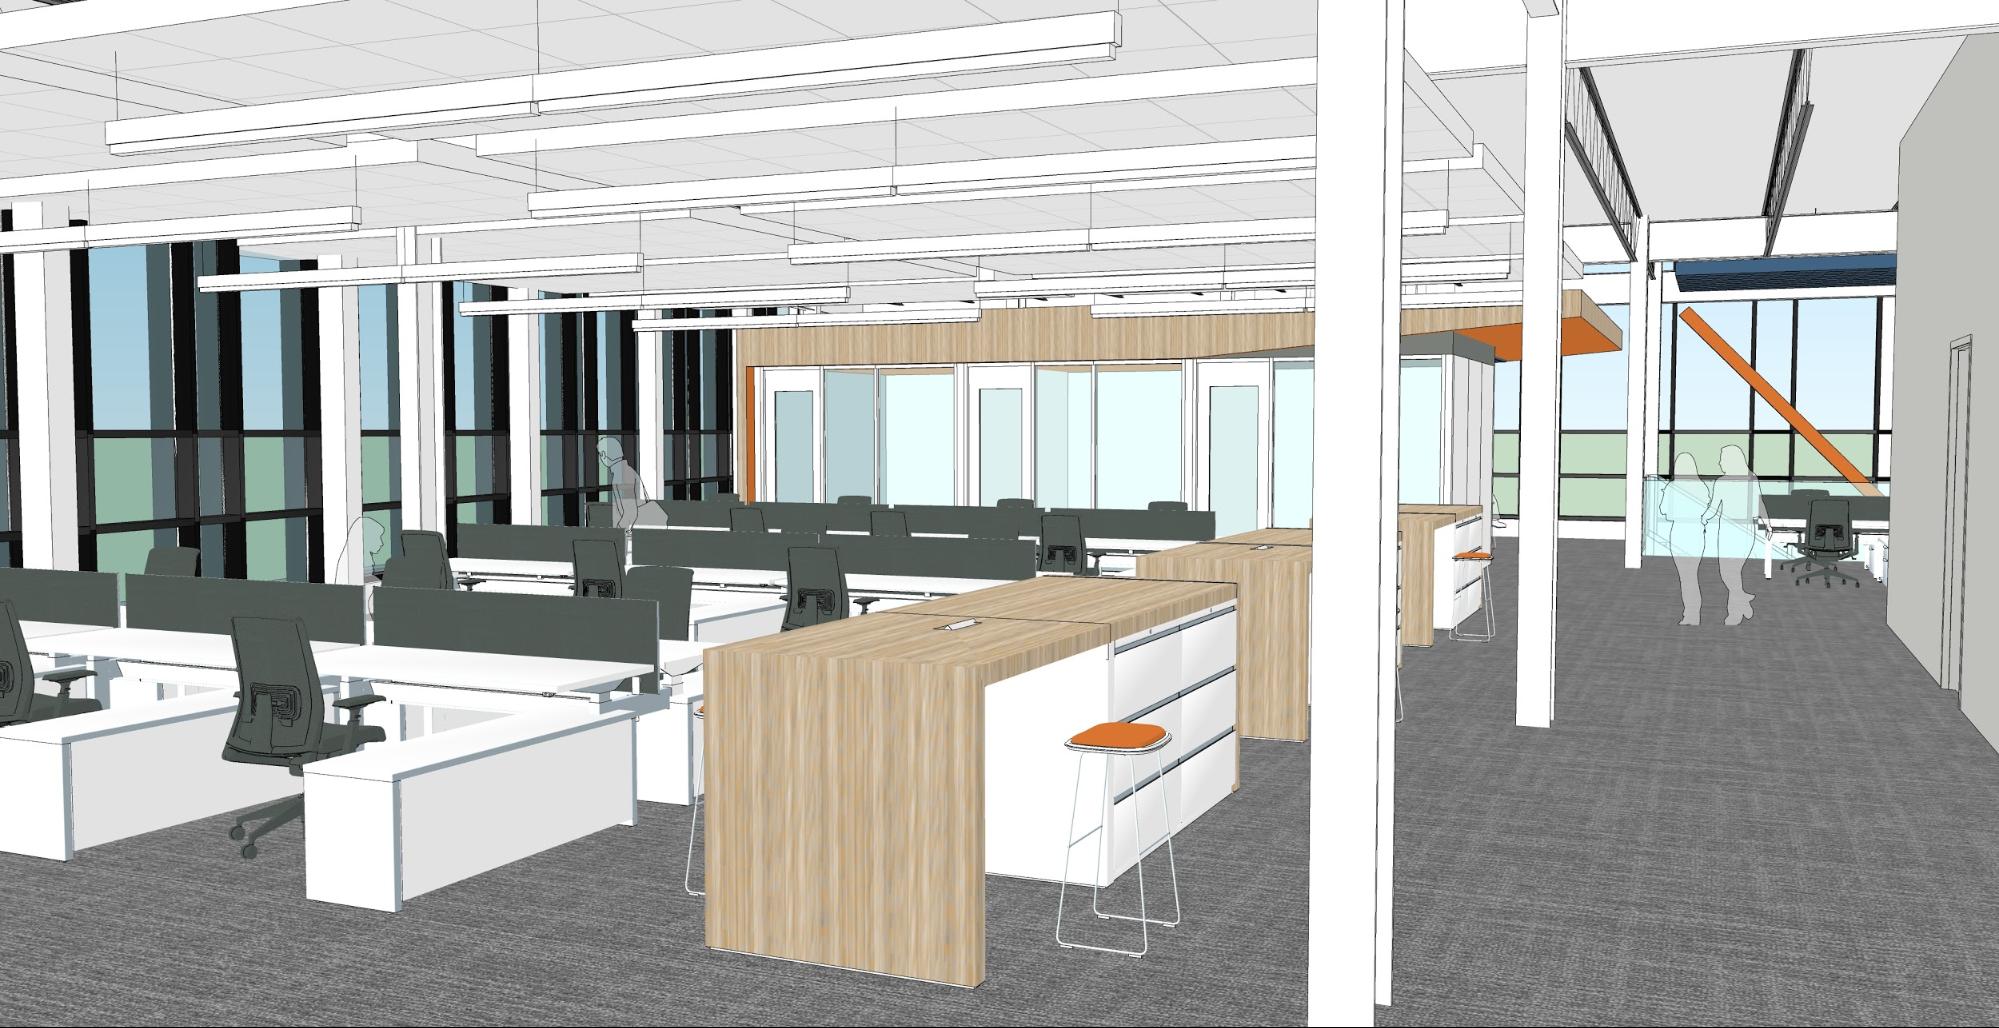 See How SketchUp Facilitates the Build-Out of a 14-Acre Campus for Biological Science